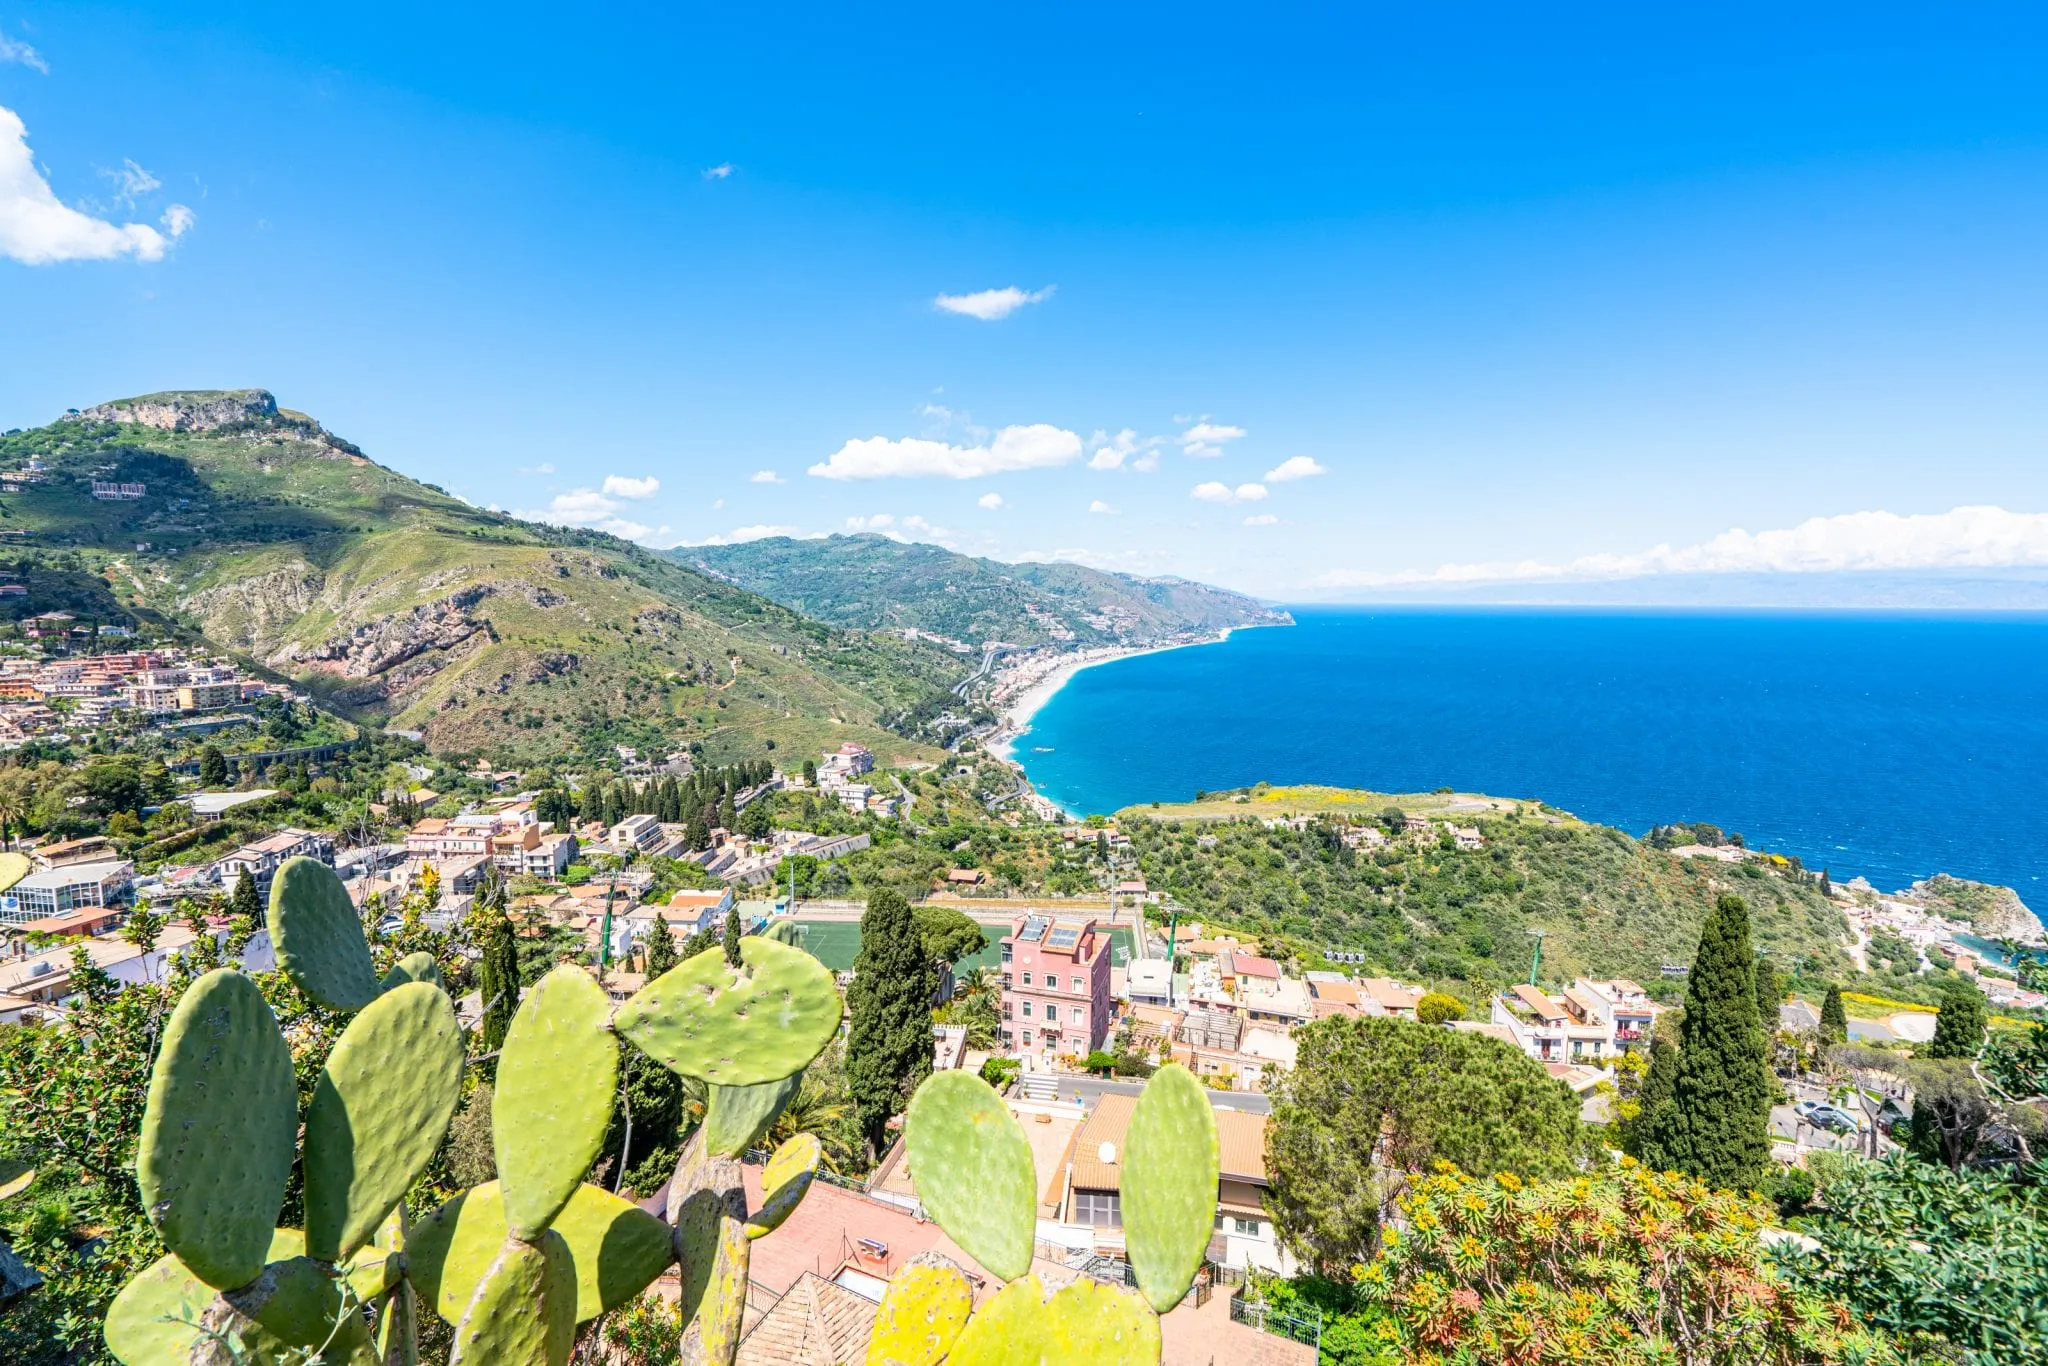 Photo of the Ionian Sea as seen from Taormina. There are cacti in the foreground of the photo.